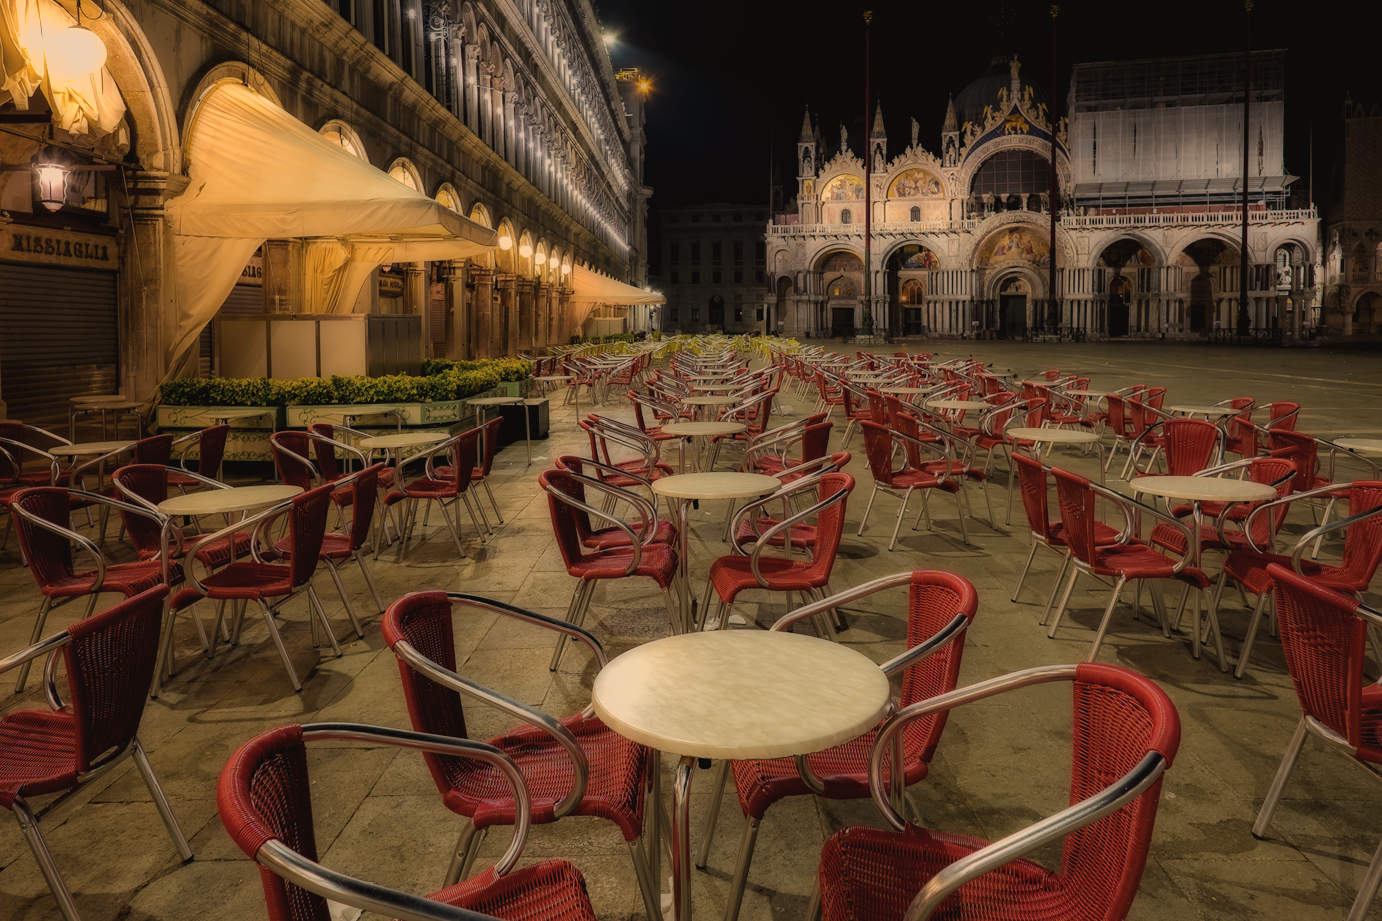 Piazza S Marco hours 03.18...